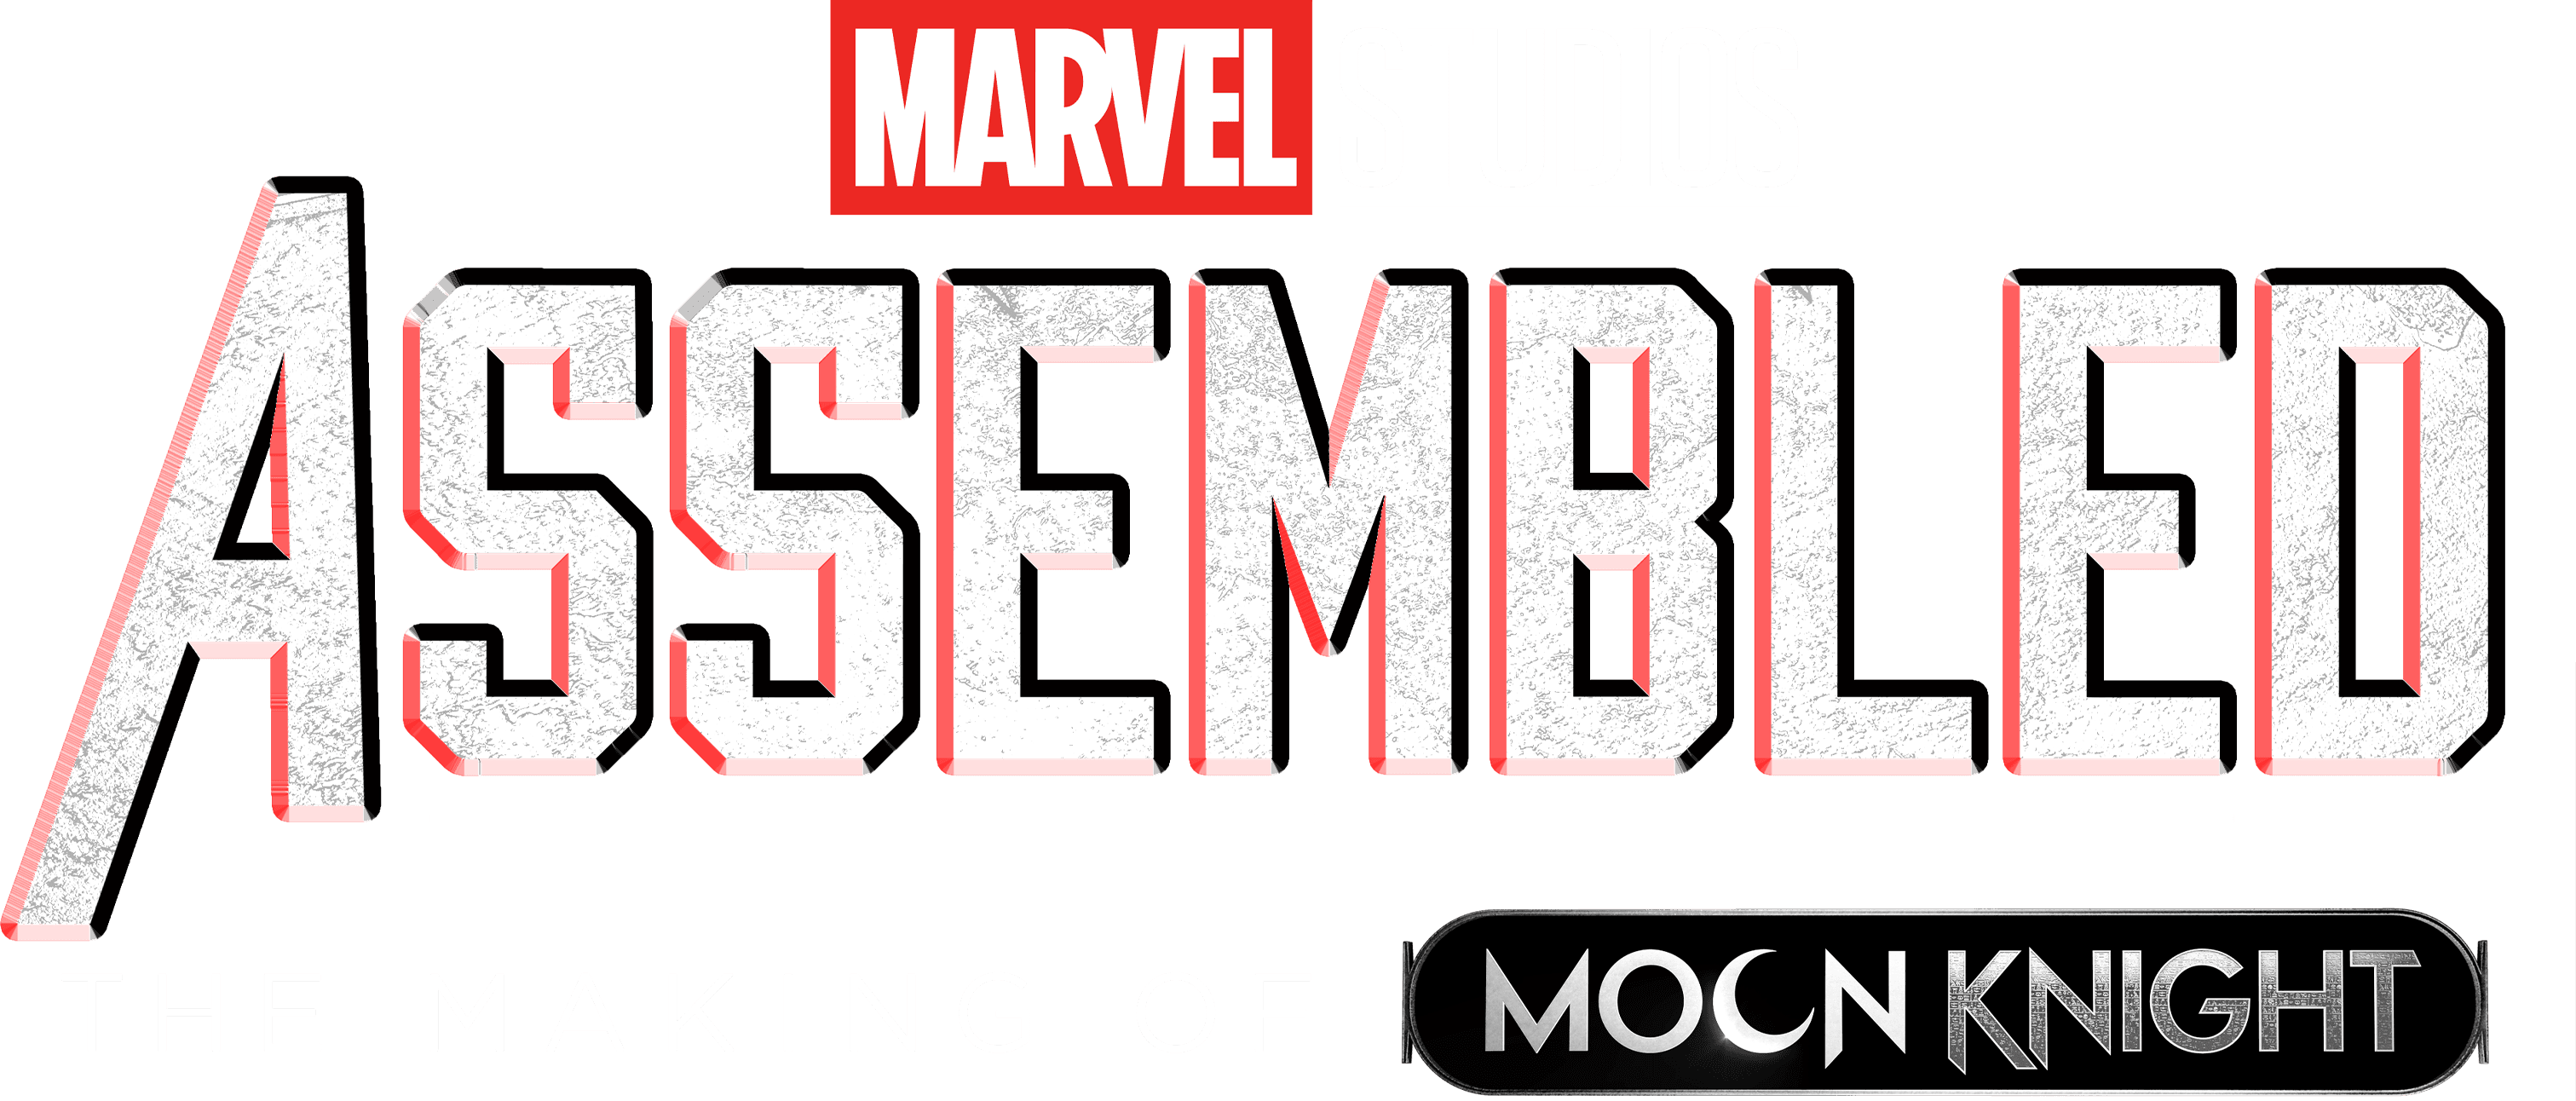 Marvel Studios Assembled: The Making of Moon Knight logo